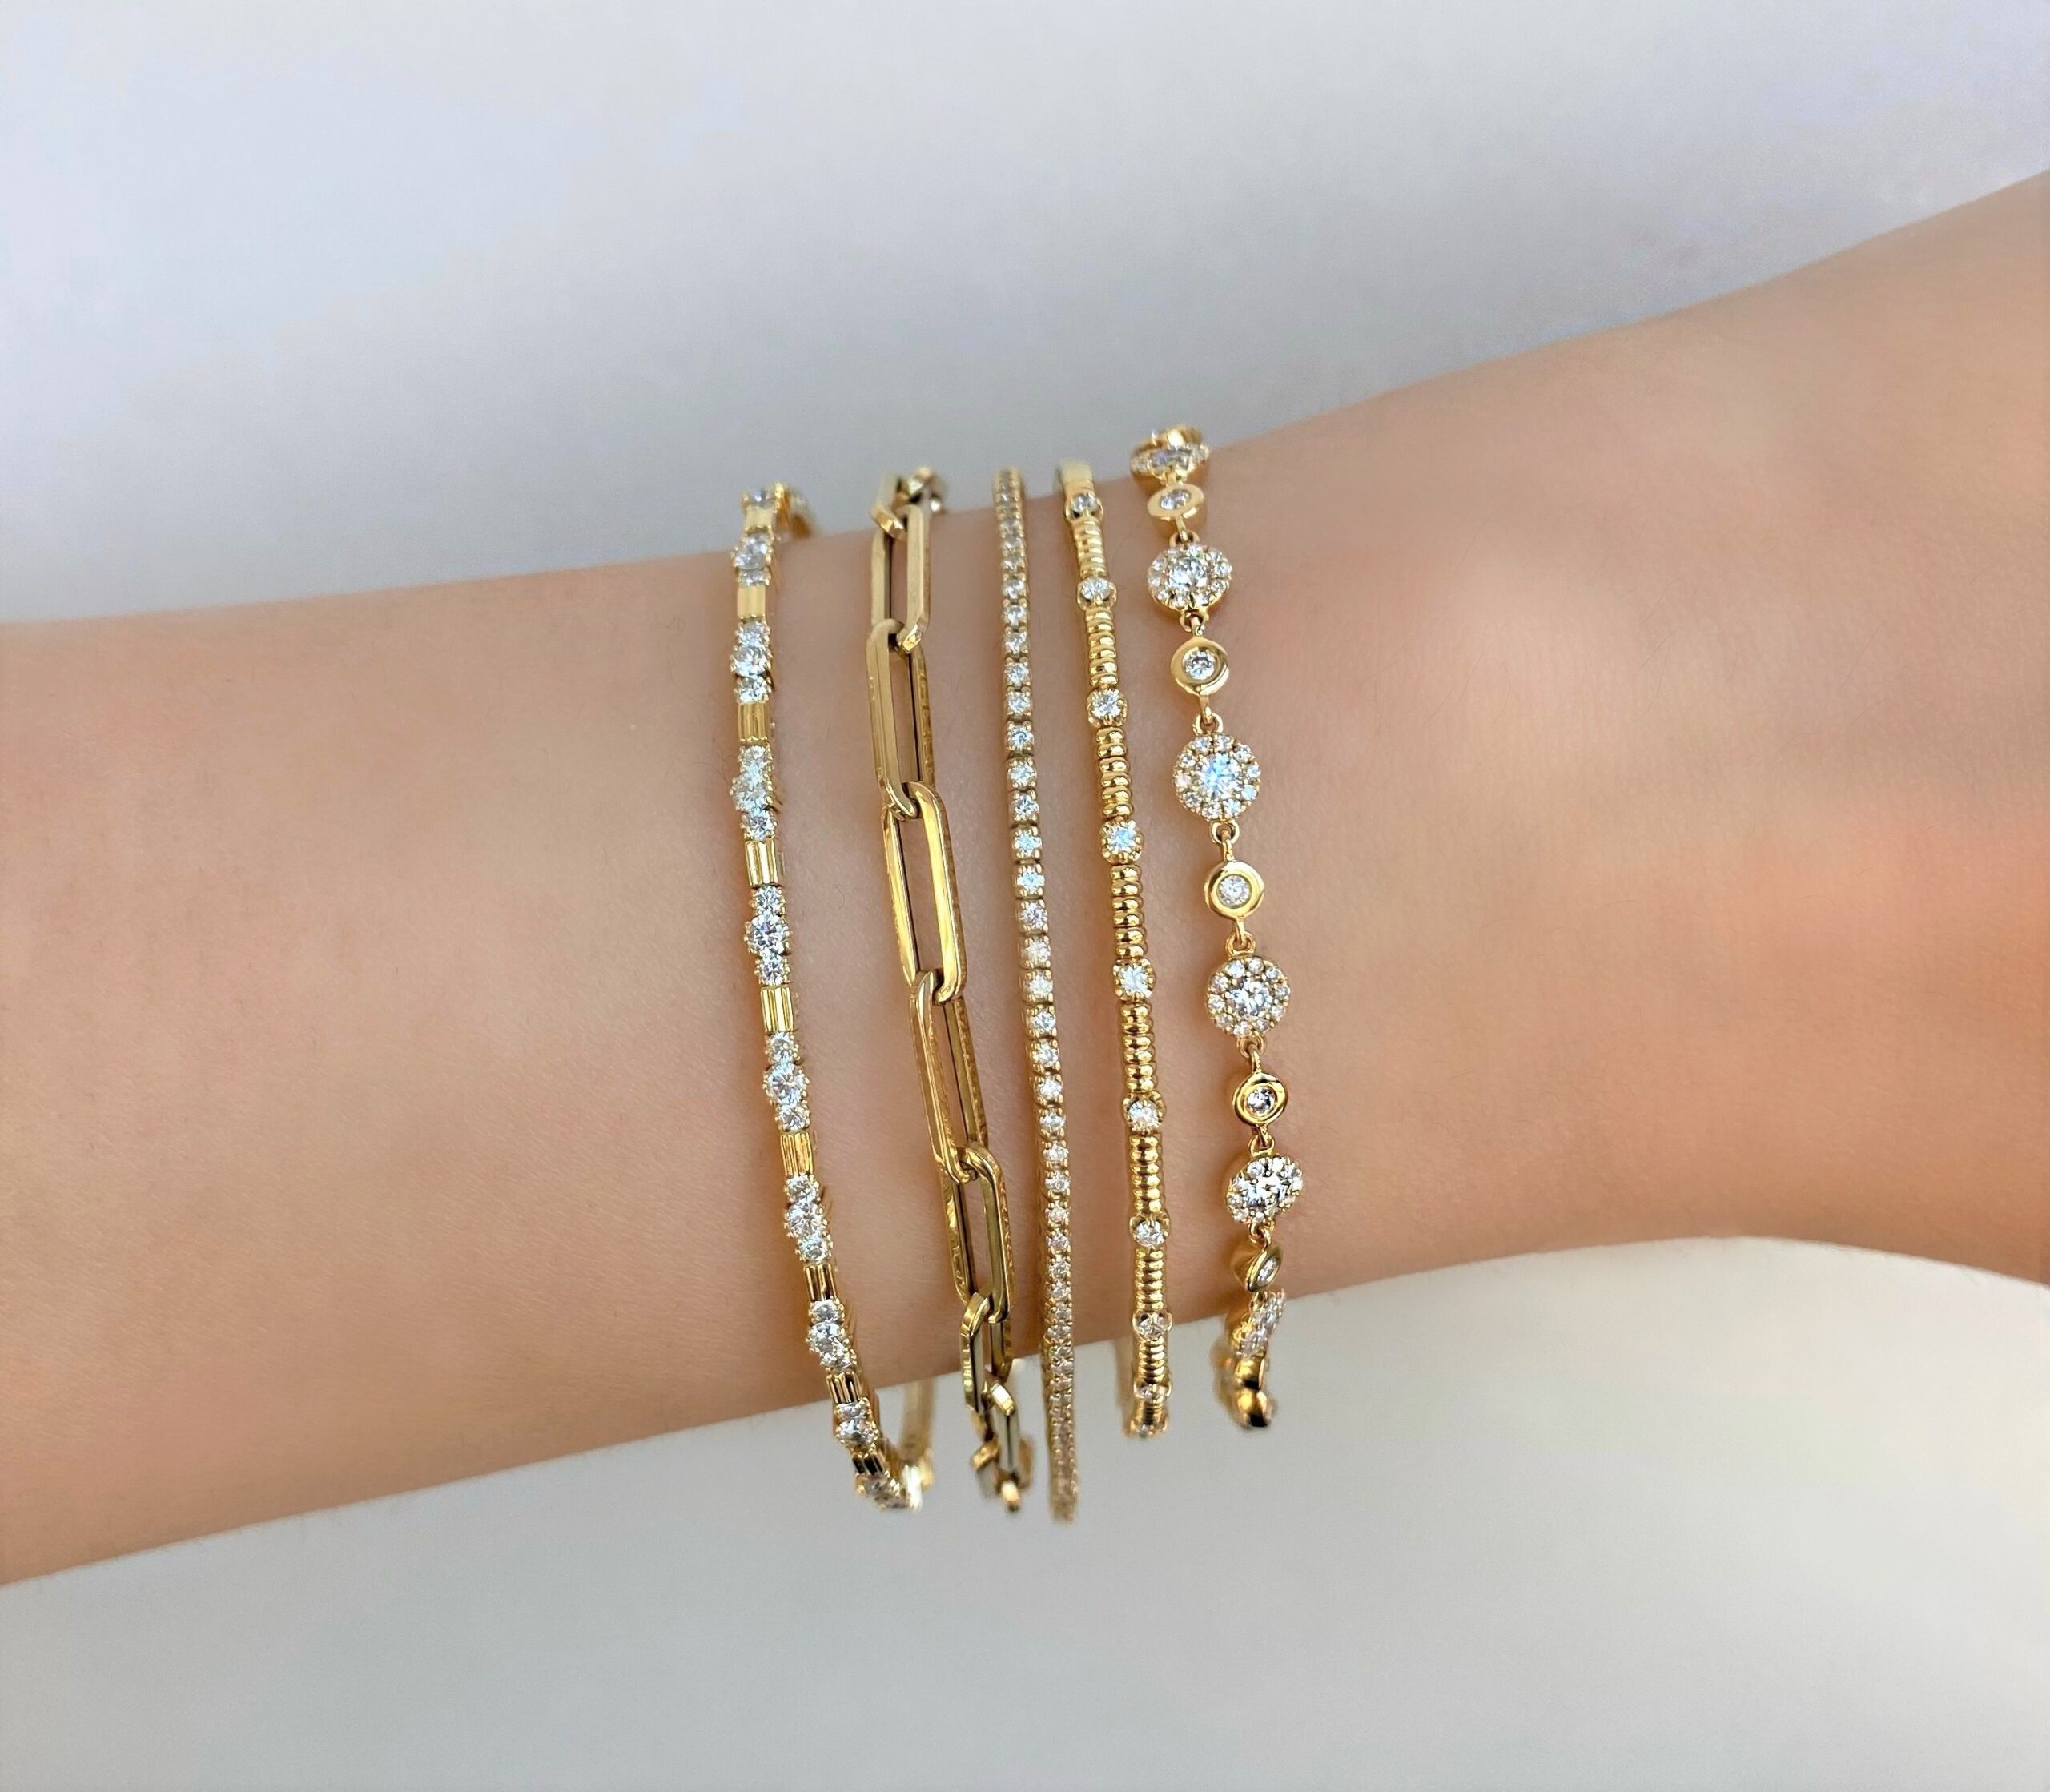 Discover more than 86 stackable bracelets for small wrists - in.duhocakina